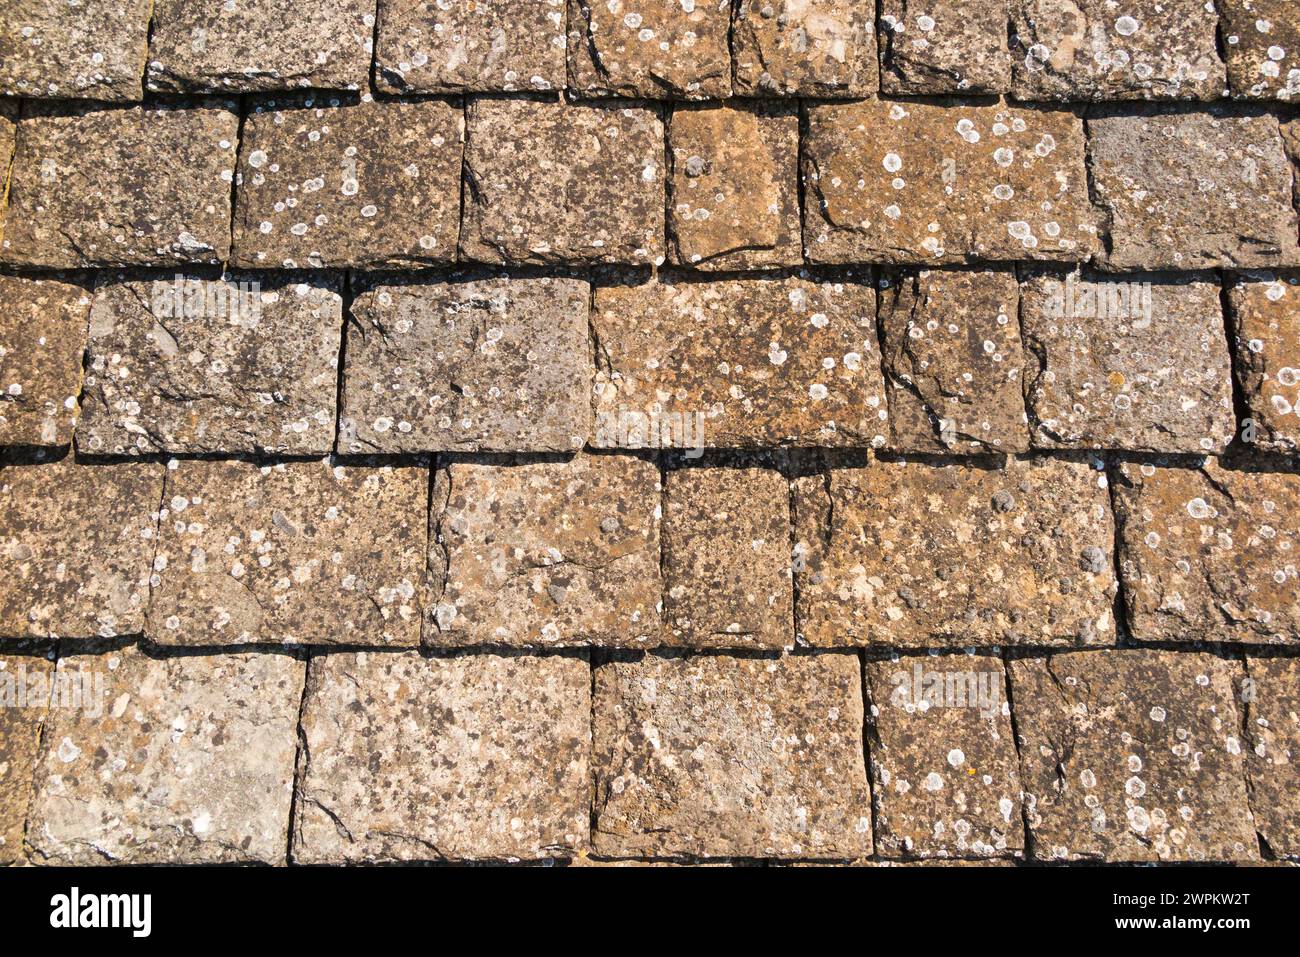 A stone roof made with / covered with tile stones of sedimentary limestone rock, on a house in the Cotswolds, Oxfordshire. Stock Photo